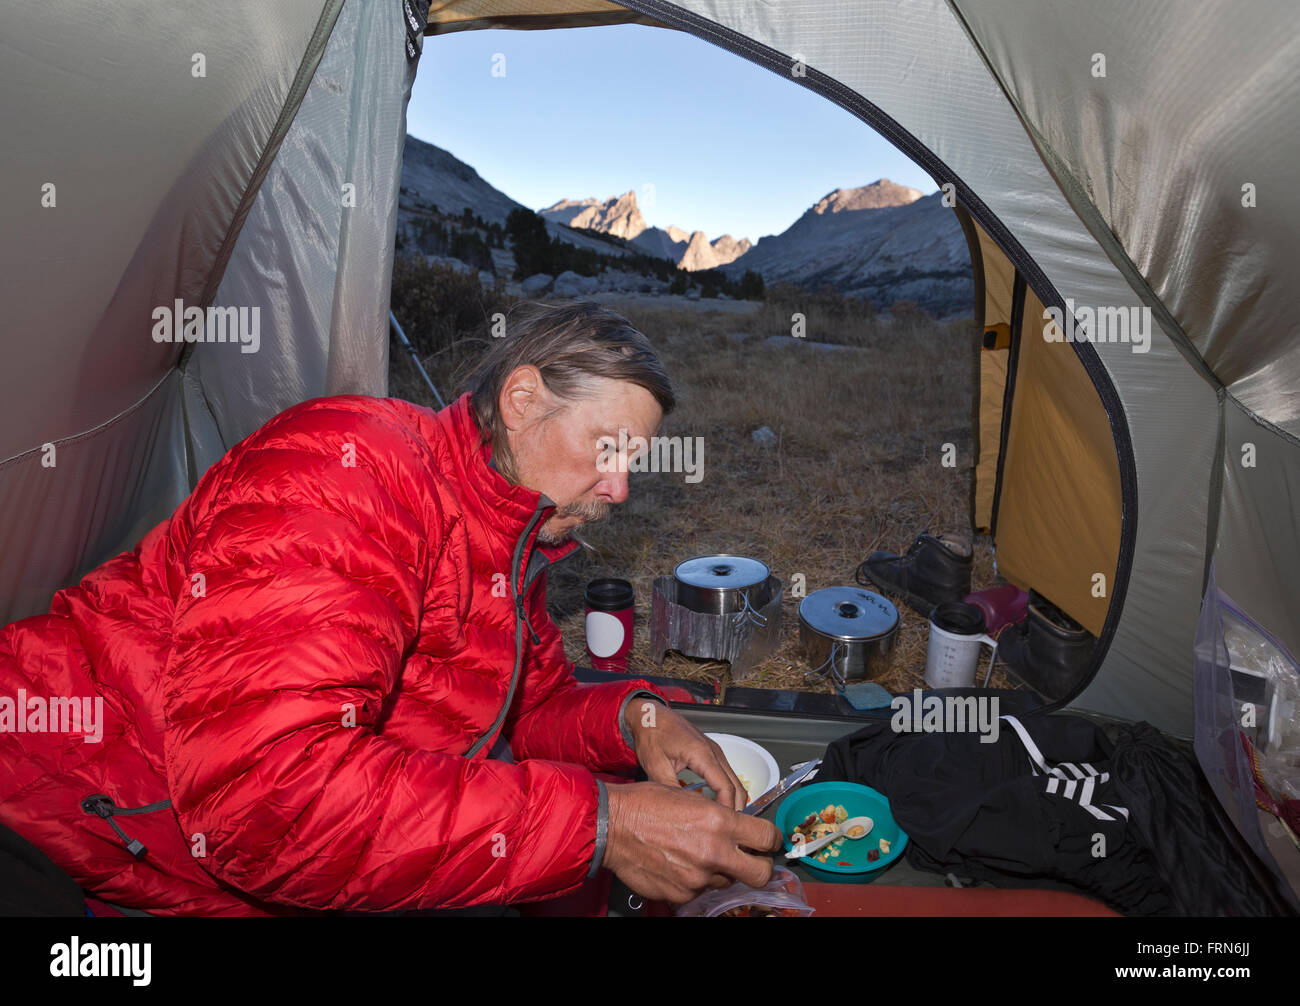 WYOMING - Preparing breakfast on a chilly morning near Deep Lake in the Bridger Wilderness section of the Wind River Range. Stock Photo